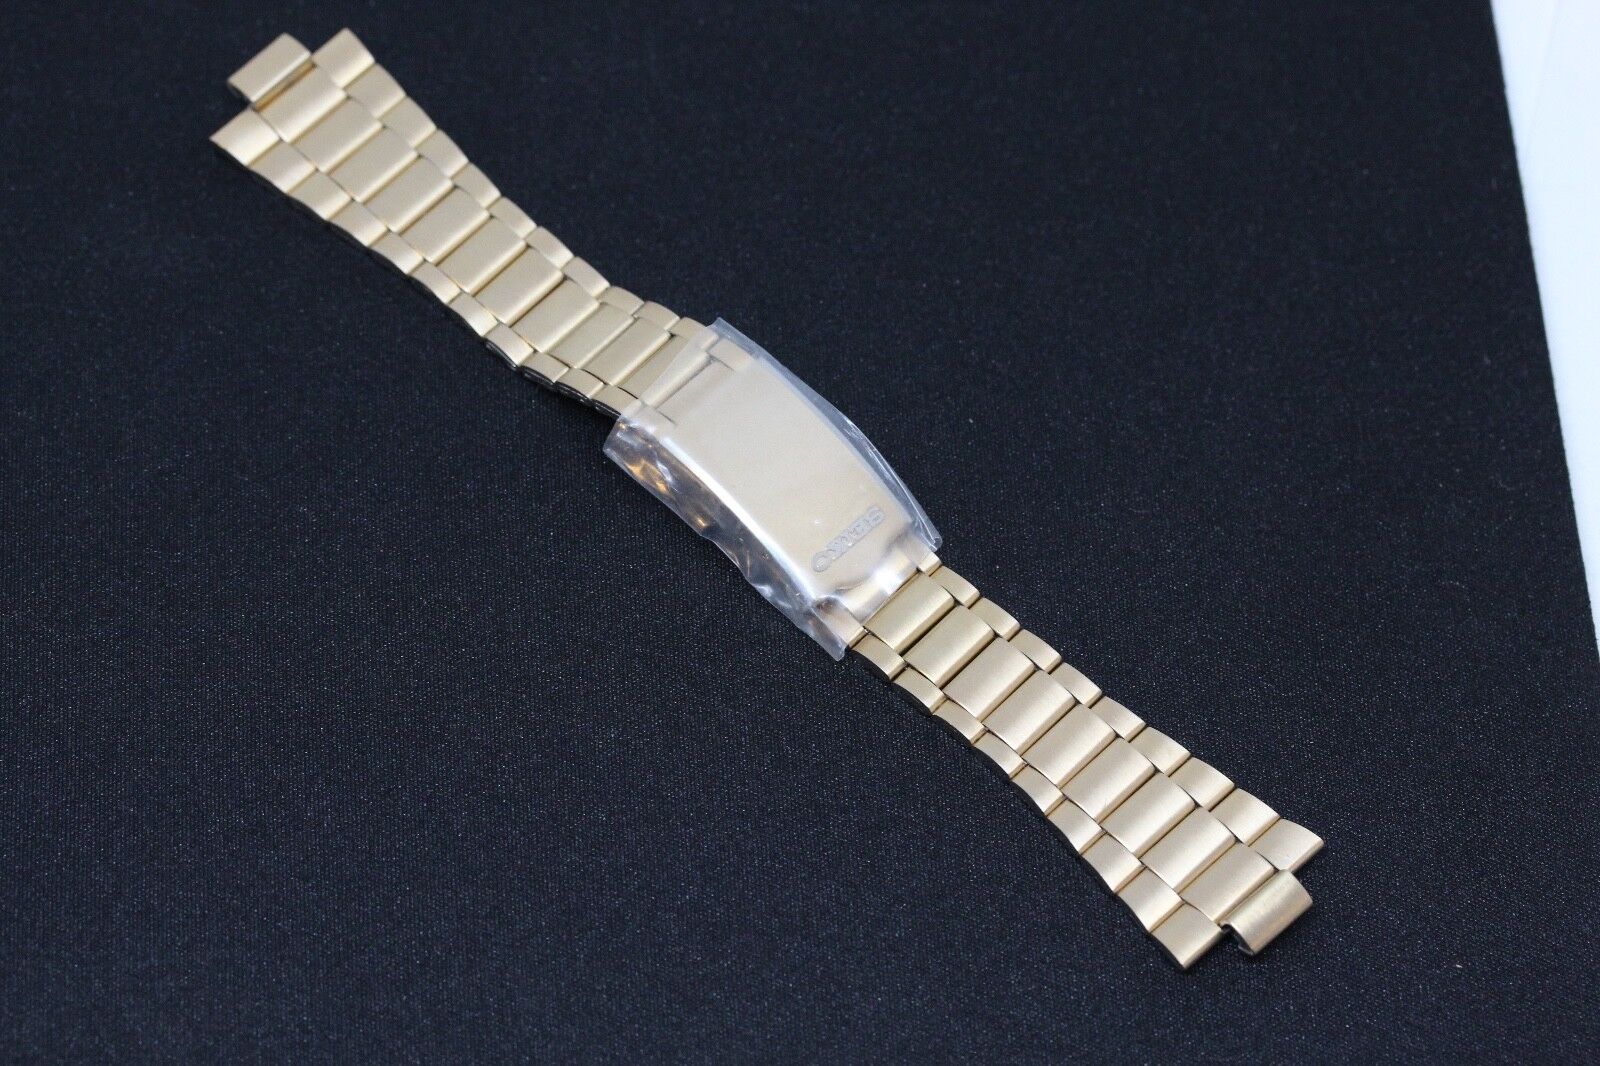 NOS Genuine Gold Color / Plated Seiko Bracelet 23 & 9.9 mm Full Size Band Strap